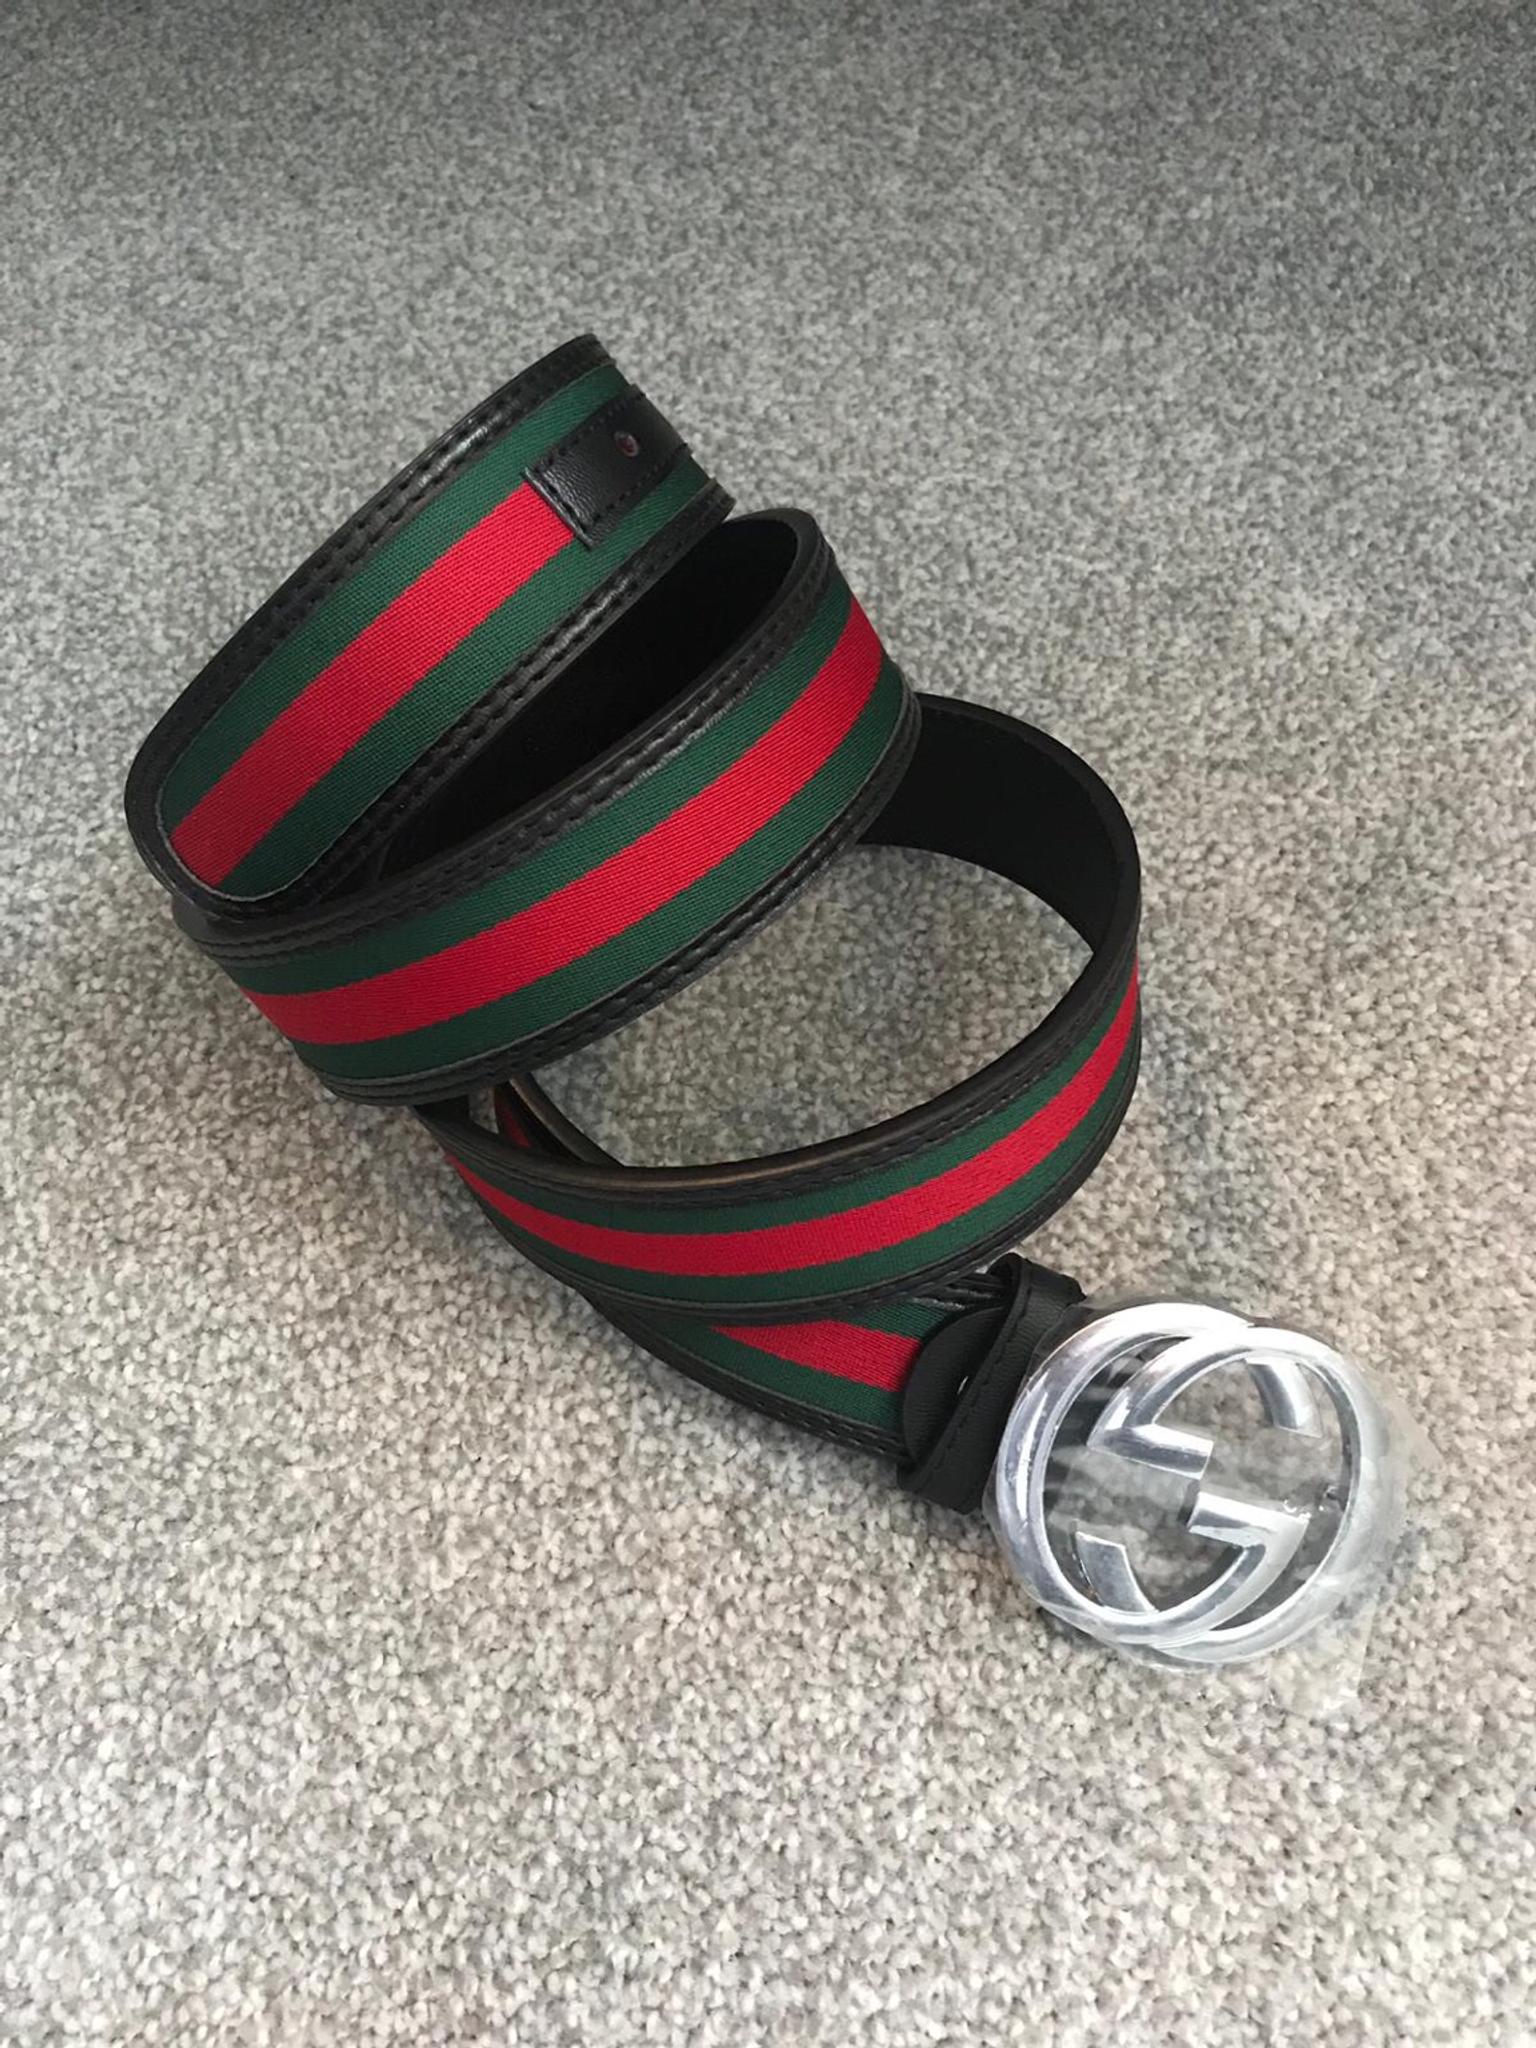 Gucci belt in TS25 Carew for £50.00 for sale | Shpock